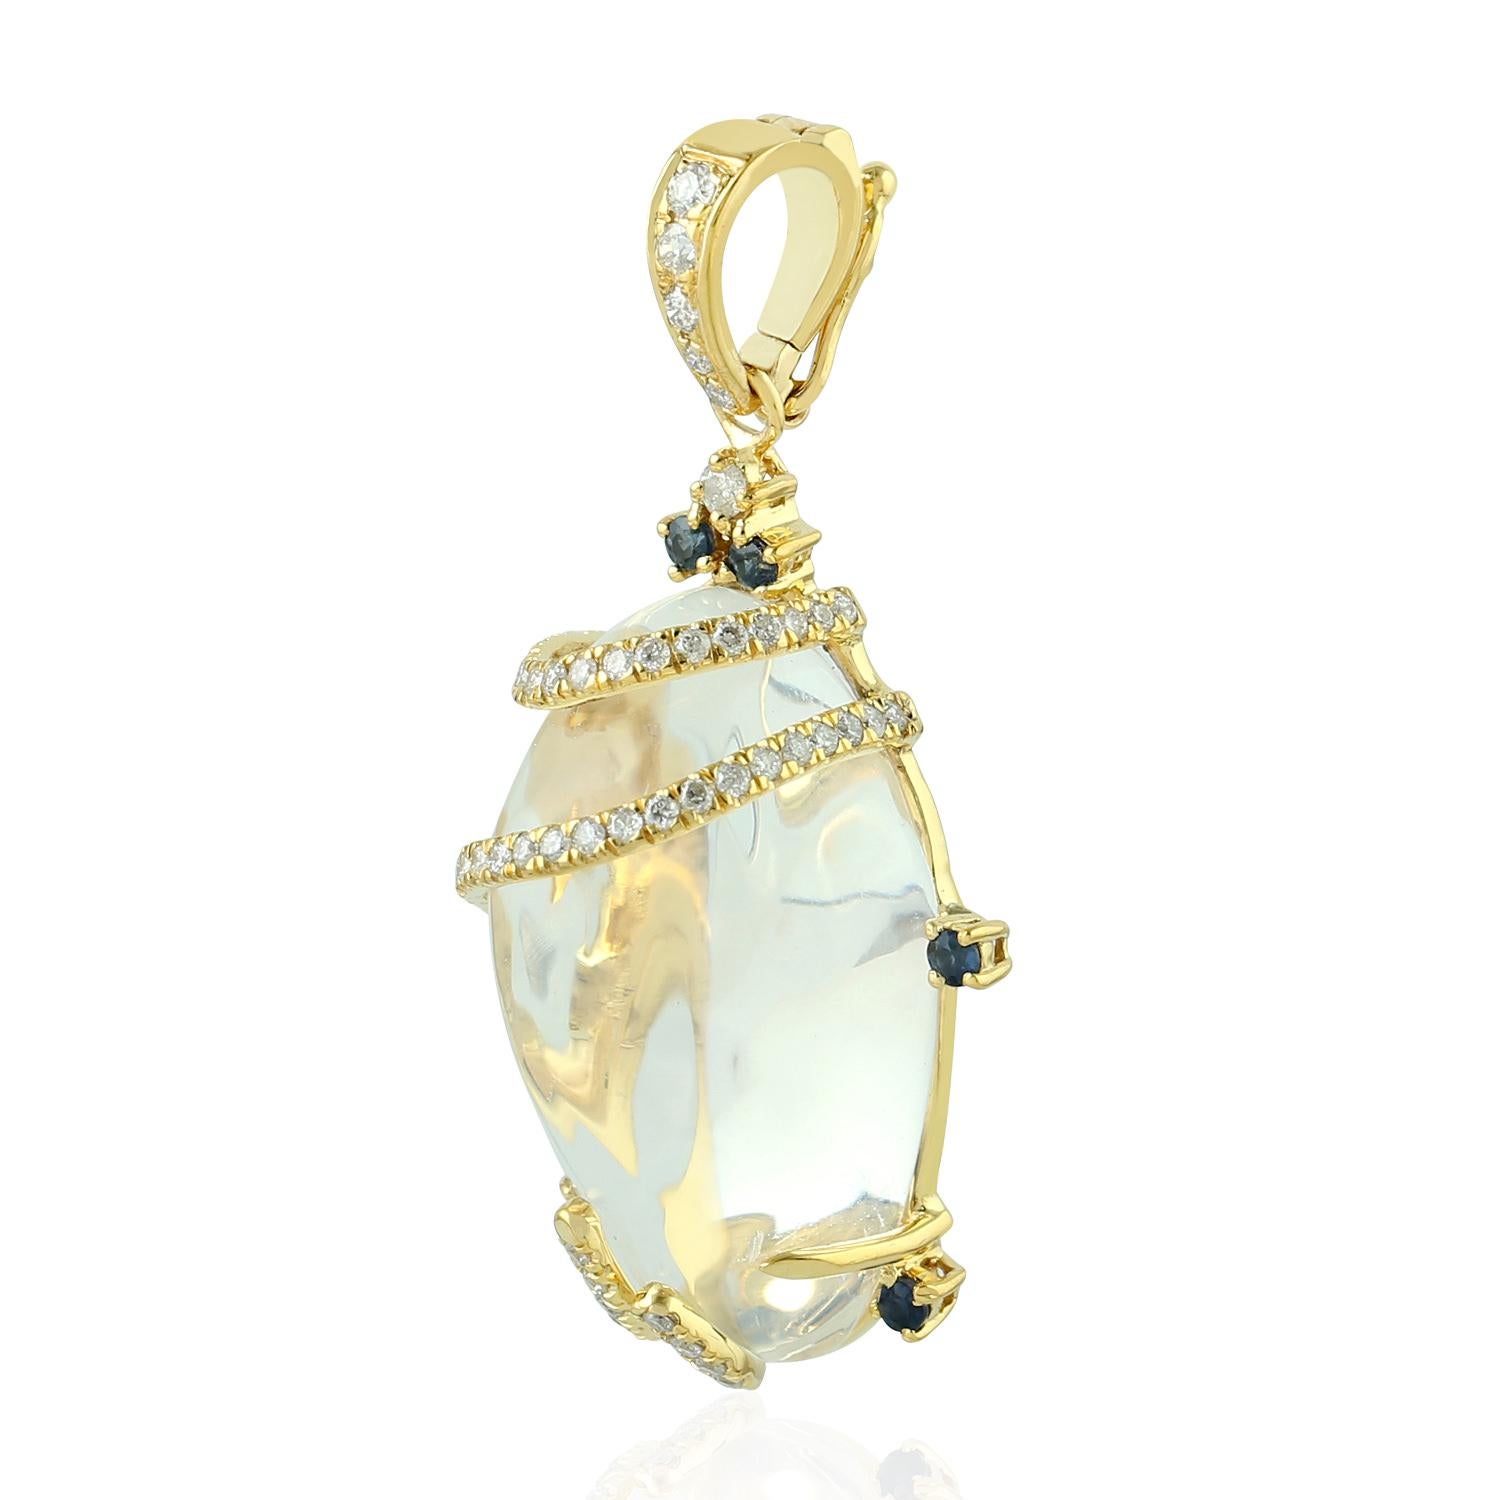 Cast in 18 Karat gold, this beautiful pendant features 12.98 carats of opal & .16 carats of sparkling diamonds.  See other opal collection matching pieces.

FOLLOW  MEGHNA JEWELS storefront to view the latest collection & exclusive pieces.  Meghna